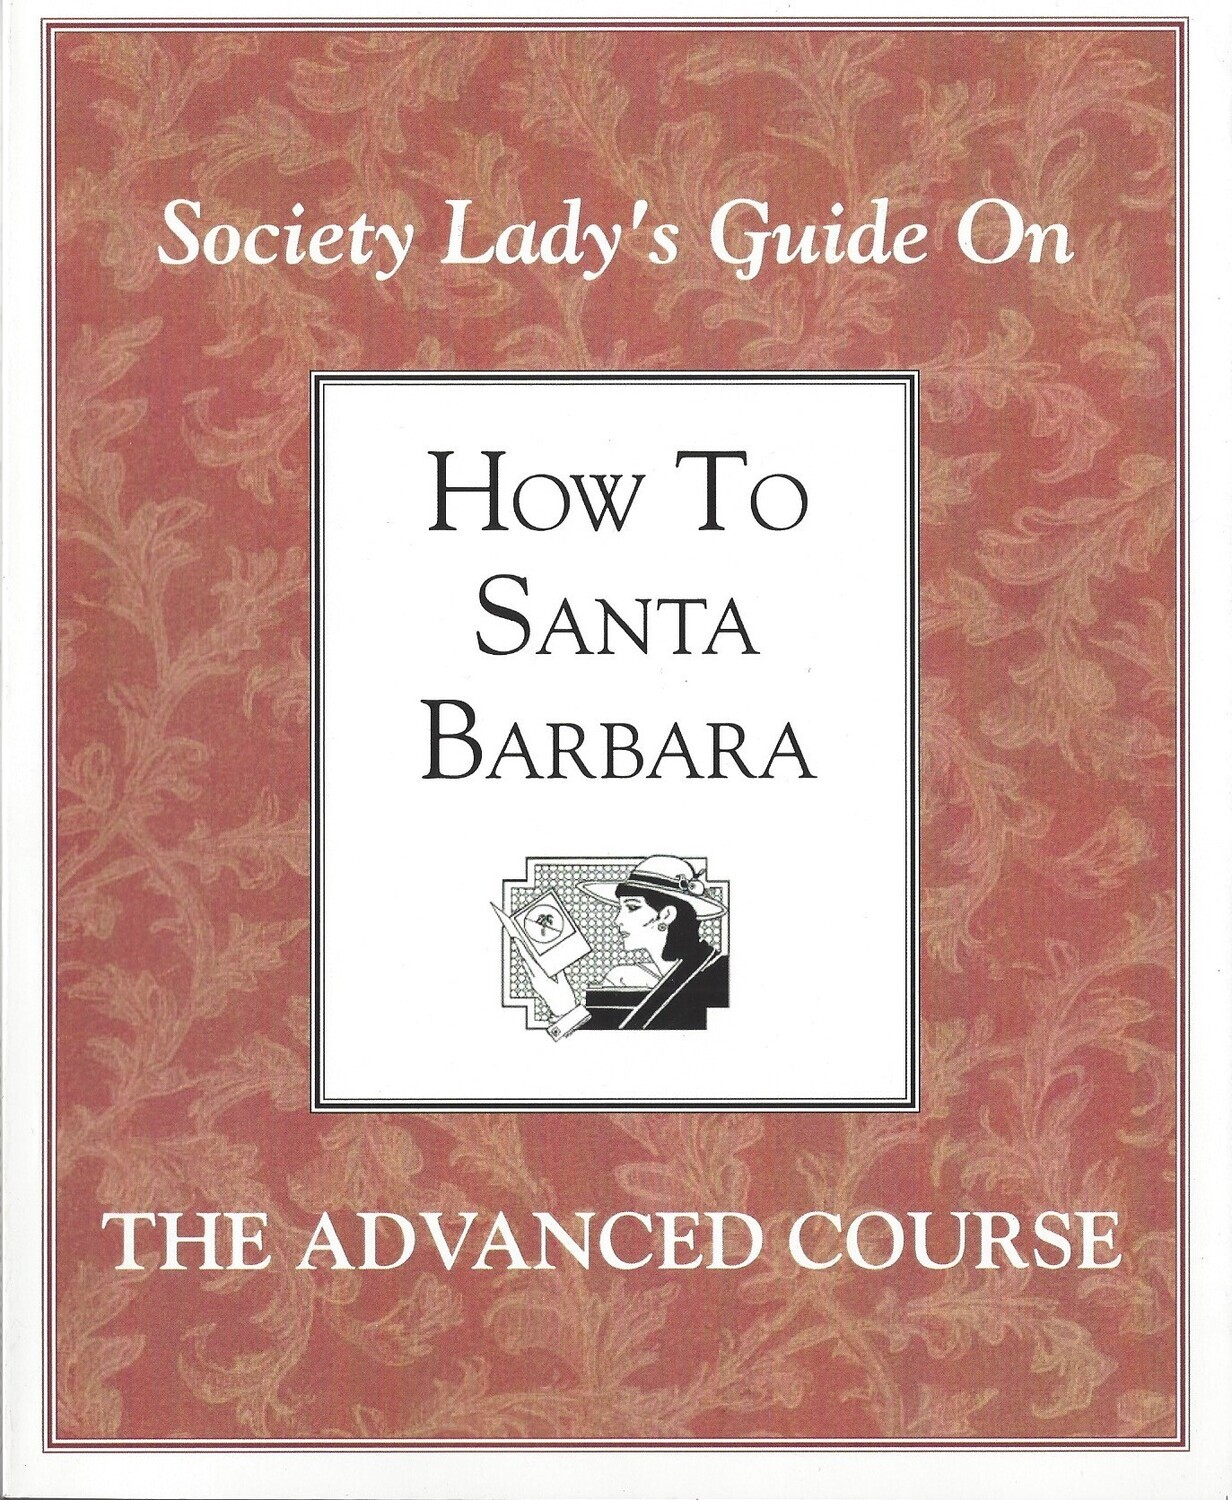 Society Lady's Guide On How to Santa Barbara, The Advanced Course